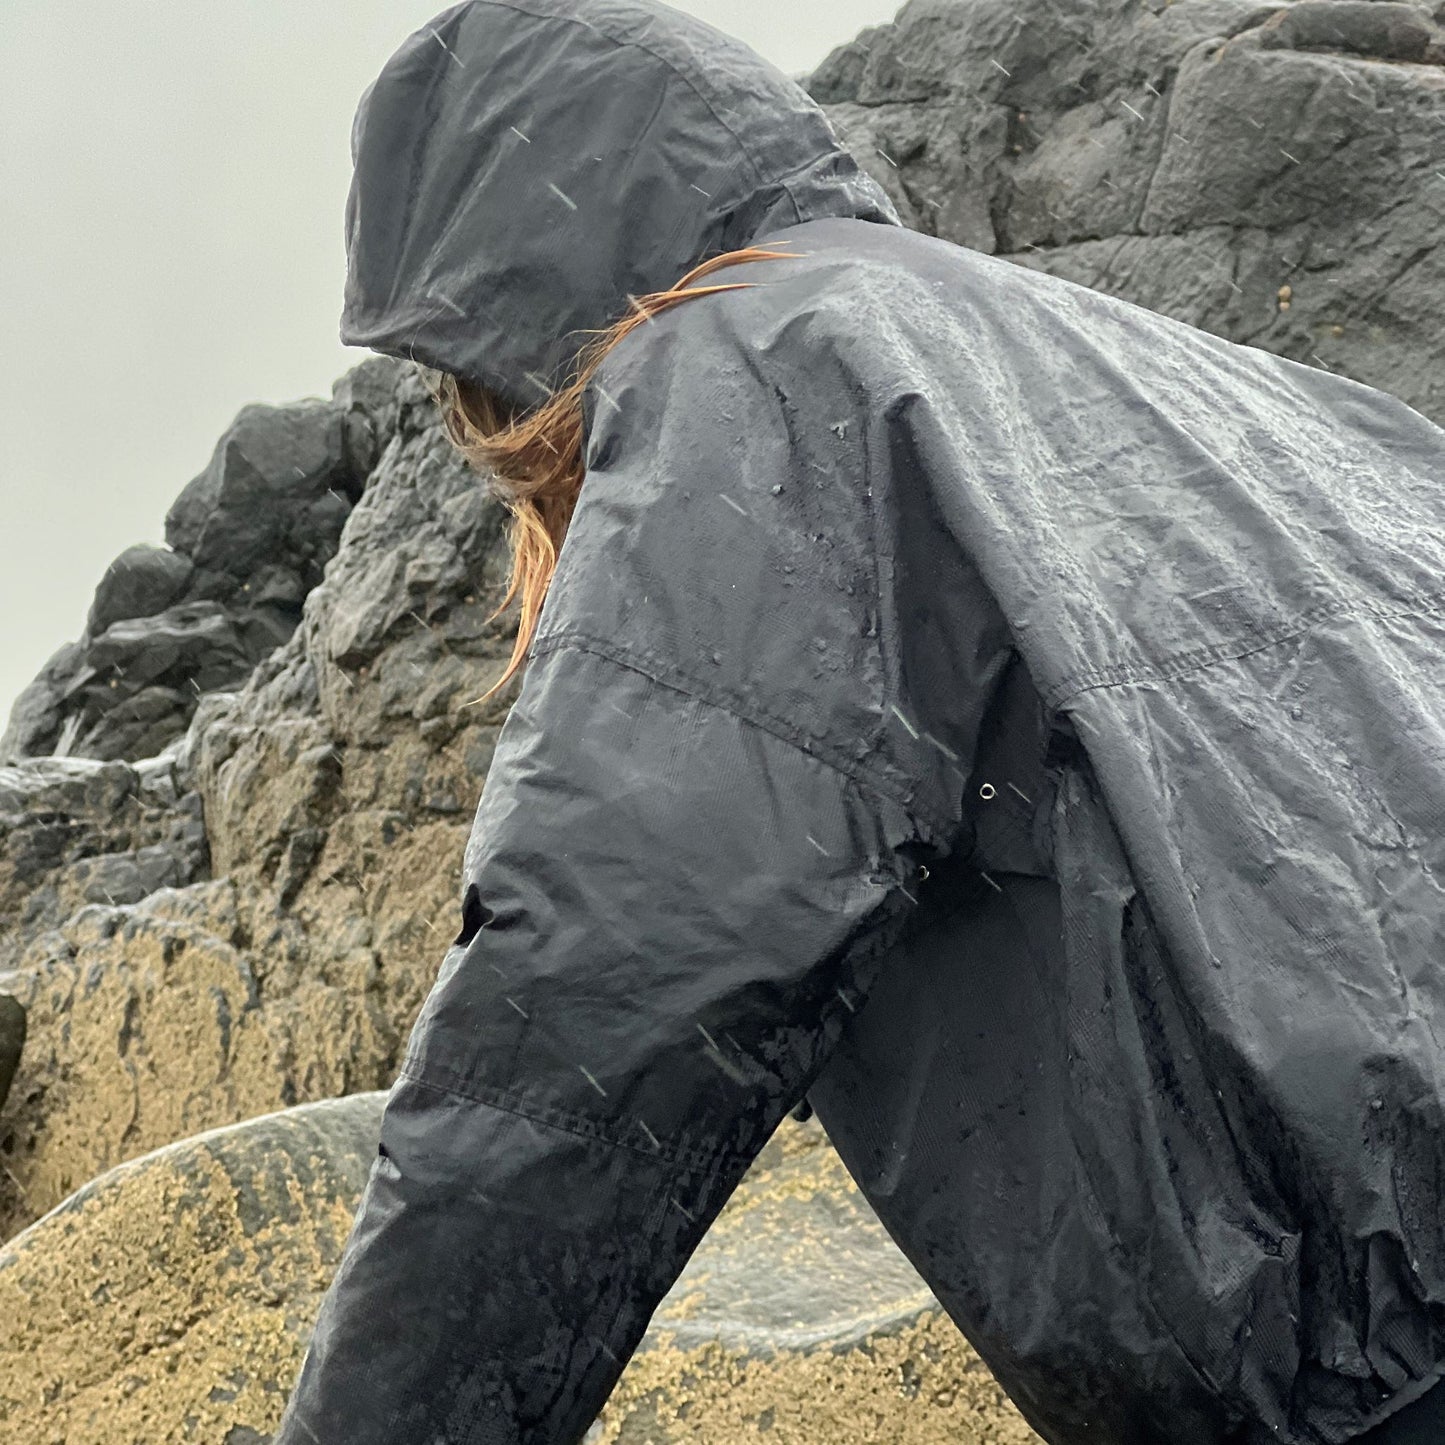 The Treshnish Windsmock is made from a lightweight 100% Organic Cotton made by Halley Stevensons of Dundee.  The colour here is Forest night.  This coat is windproof and  showerproof but not waterproof in heavy rain.